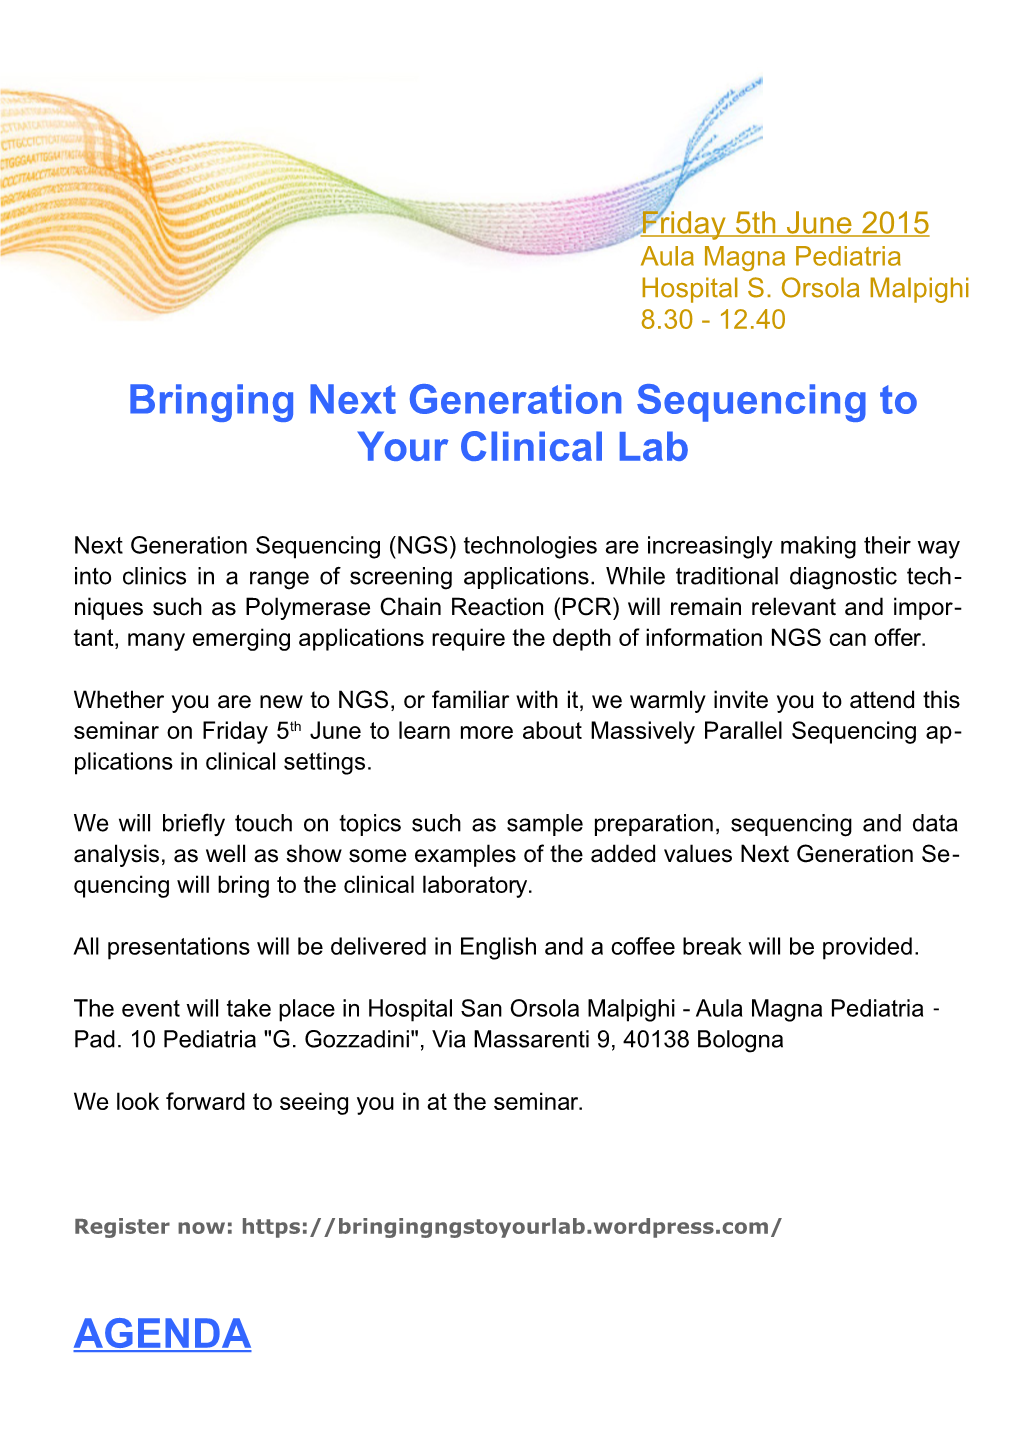 Bringing Next Generation Sequencing to Your Clinicallab